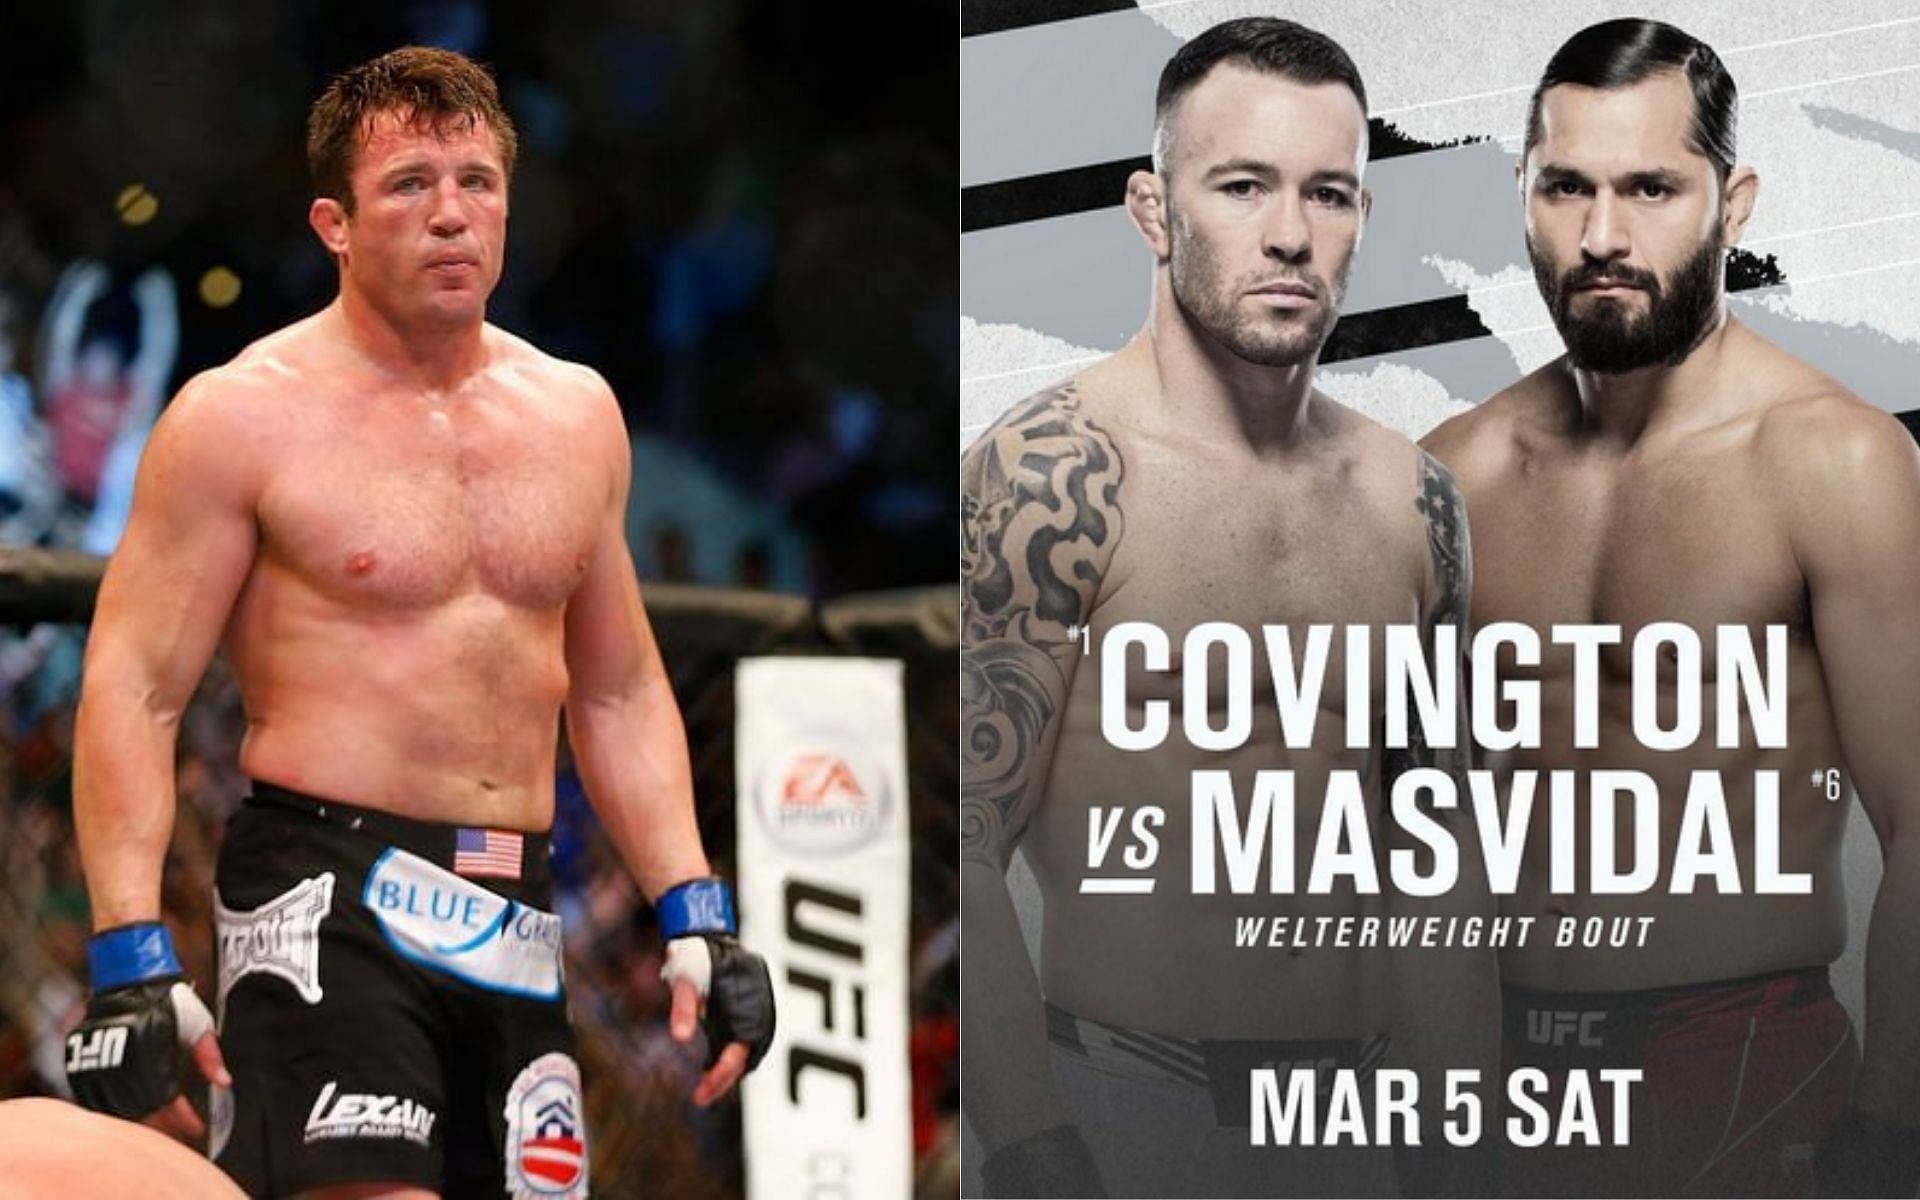 Chael Sonnen (left) and Colby Covington vs Jorge Masvidal (right) [image credits: @colbycovmma on Instagram]